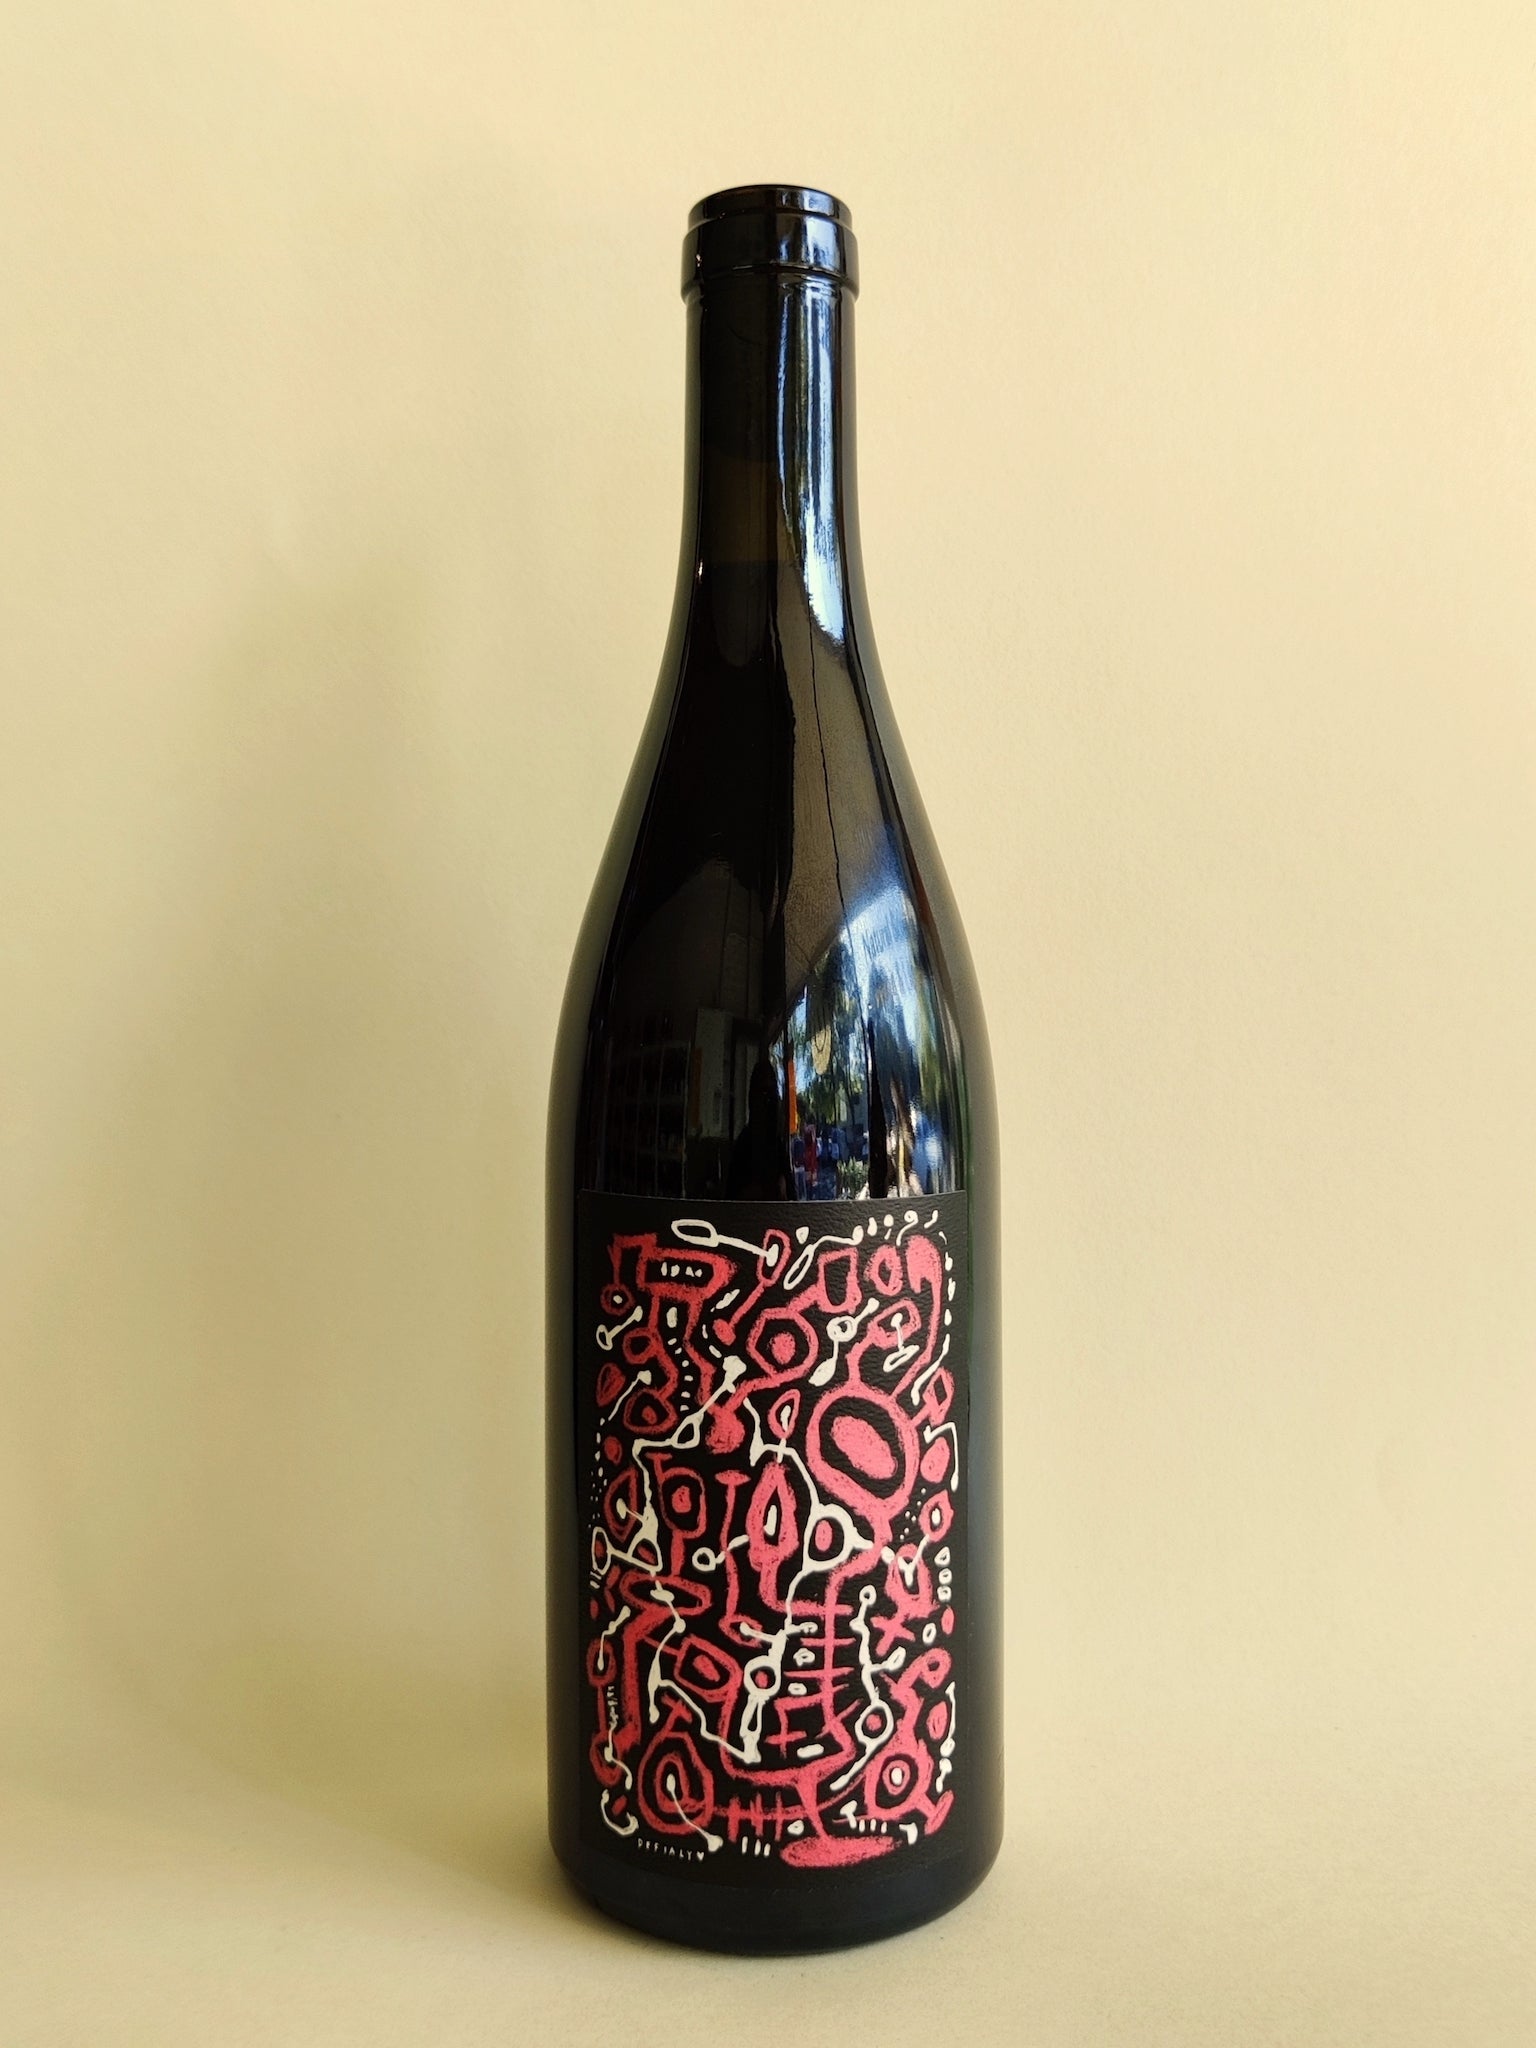 A bottle of DEFIALY Vineyard of No Love Pinot Noir from the Macedon Ranges, Victoria. 